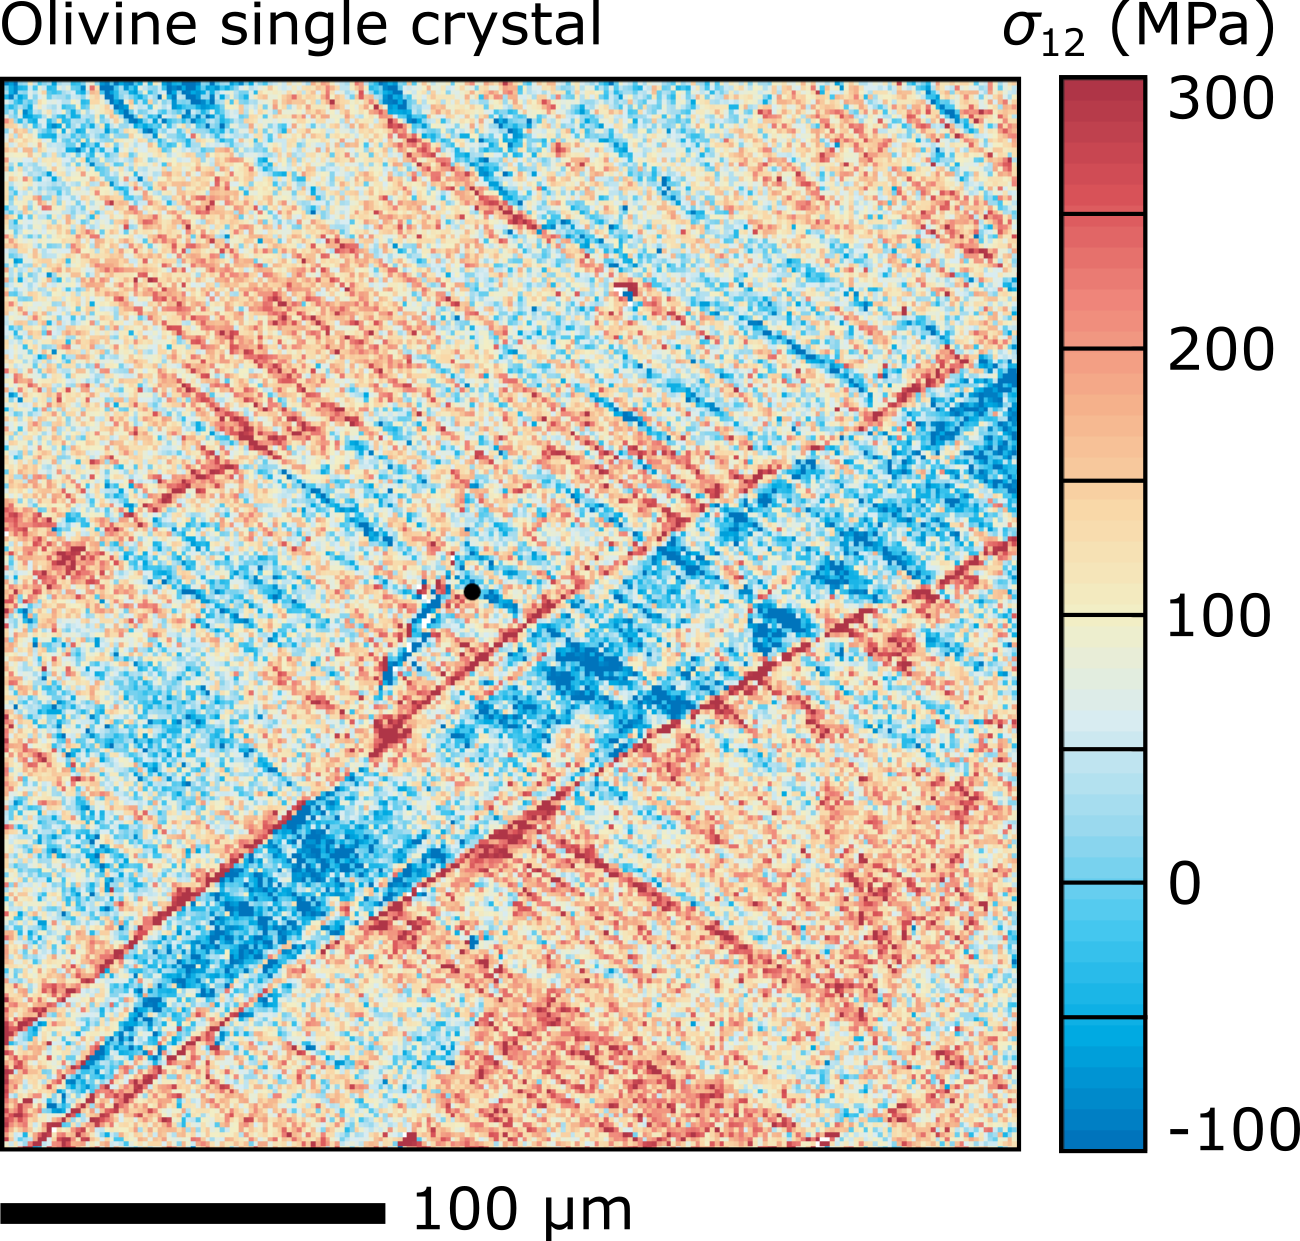 A plot showing intragranular stress heterogeneities in olivine crystal represented by black and red lines and patterns. 